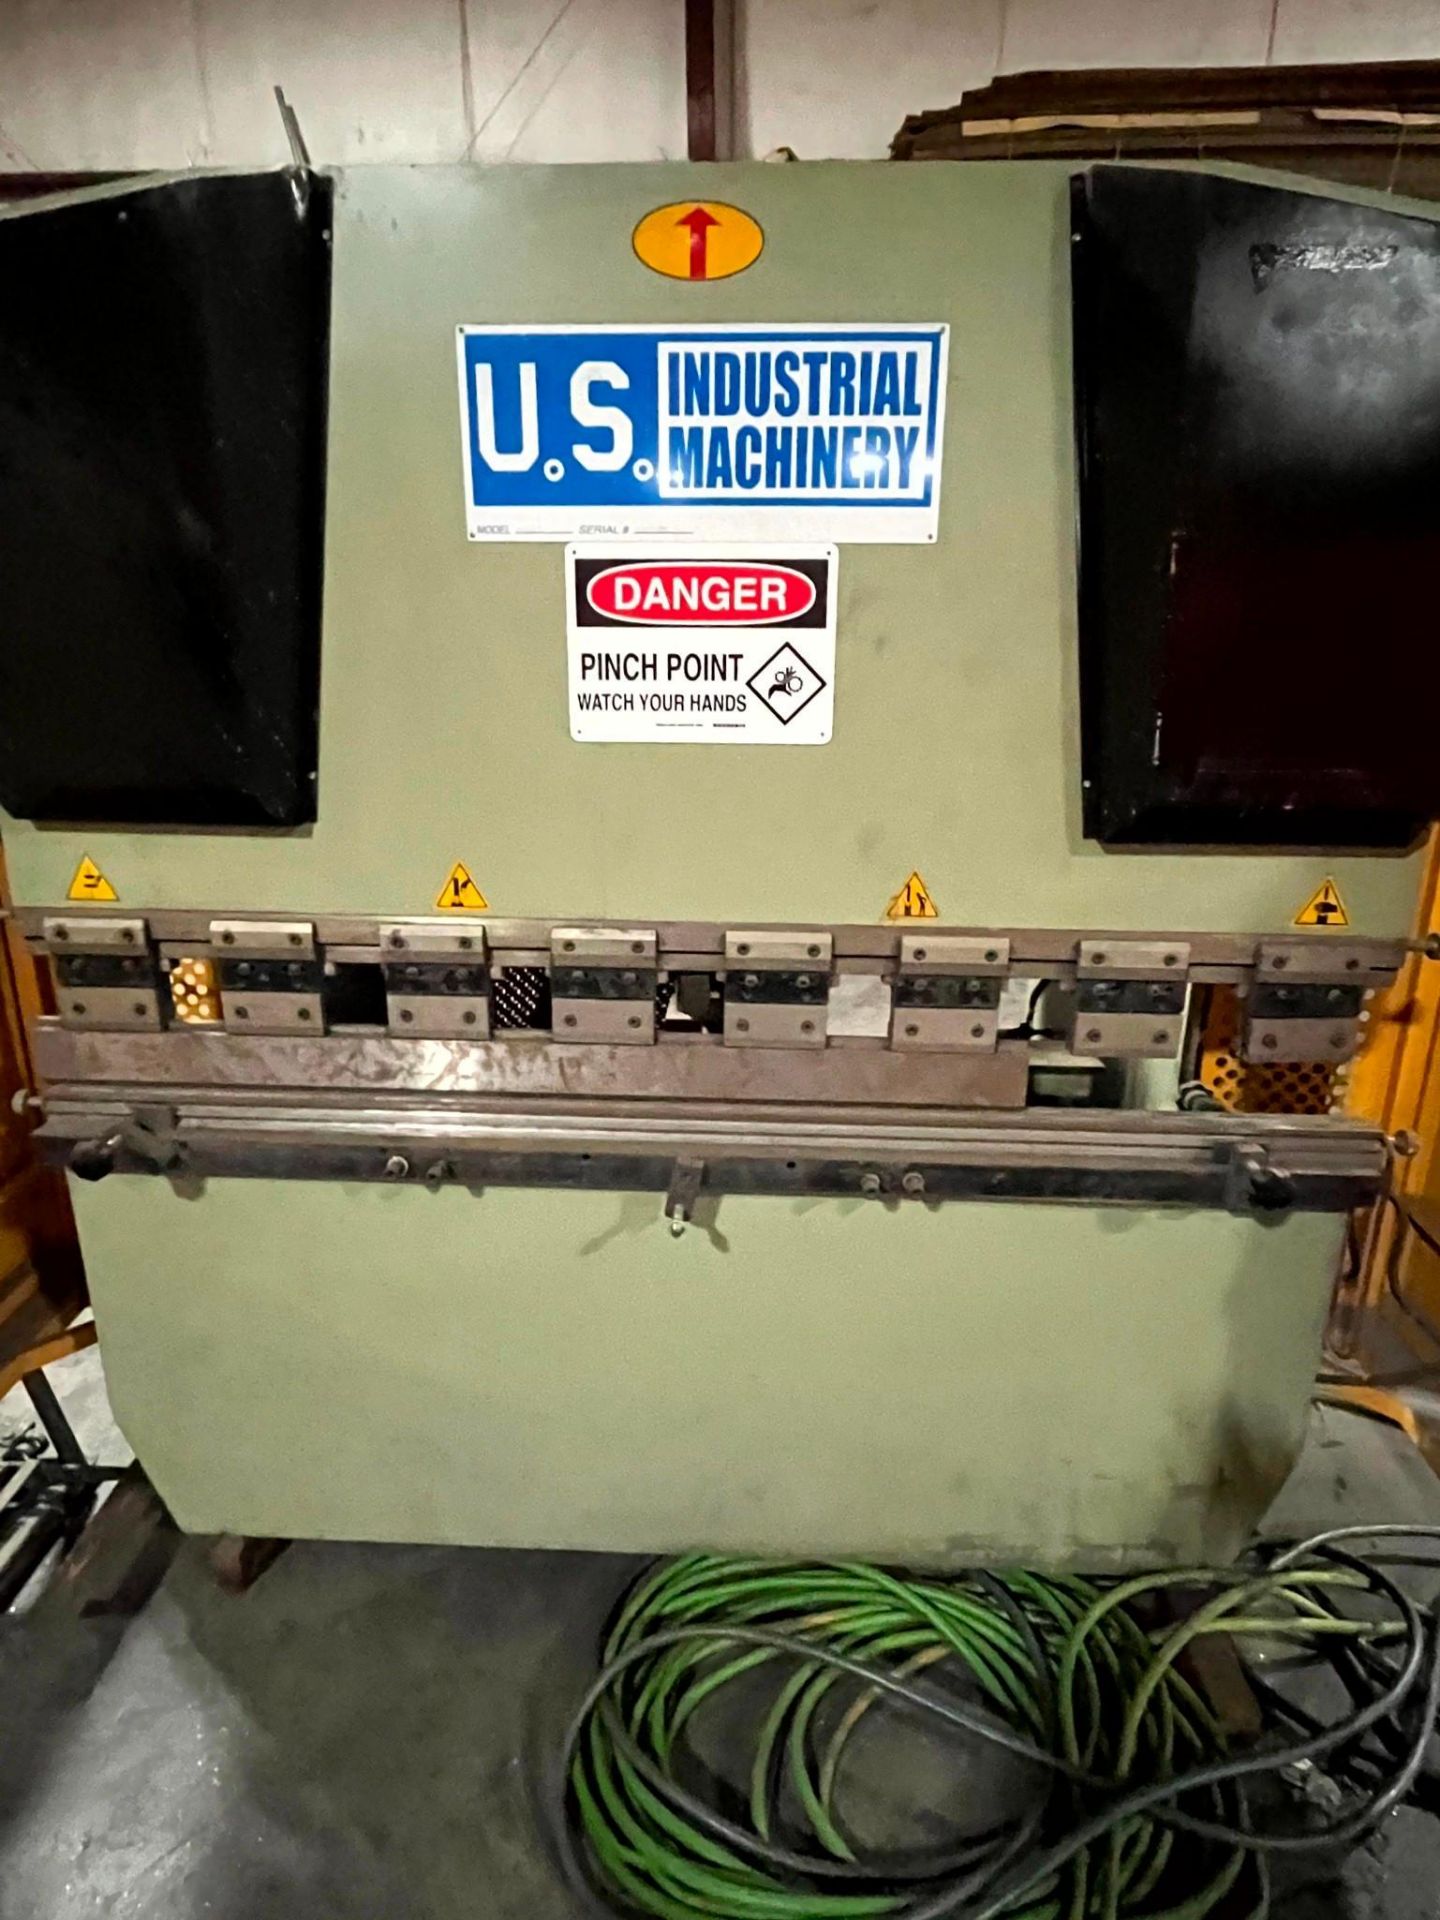 2012 44 TON X 6' US INDUSTRIAL MACHINERY 446 R PRESS BRAKE - TOOLING INCLUDED - Image 2 of 12